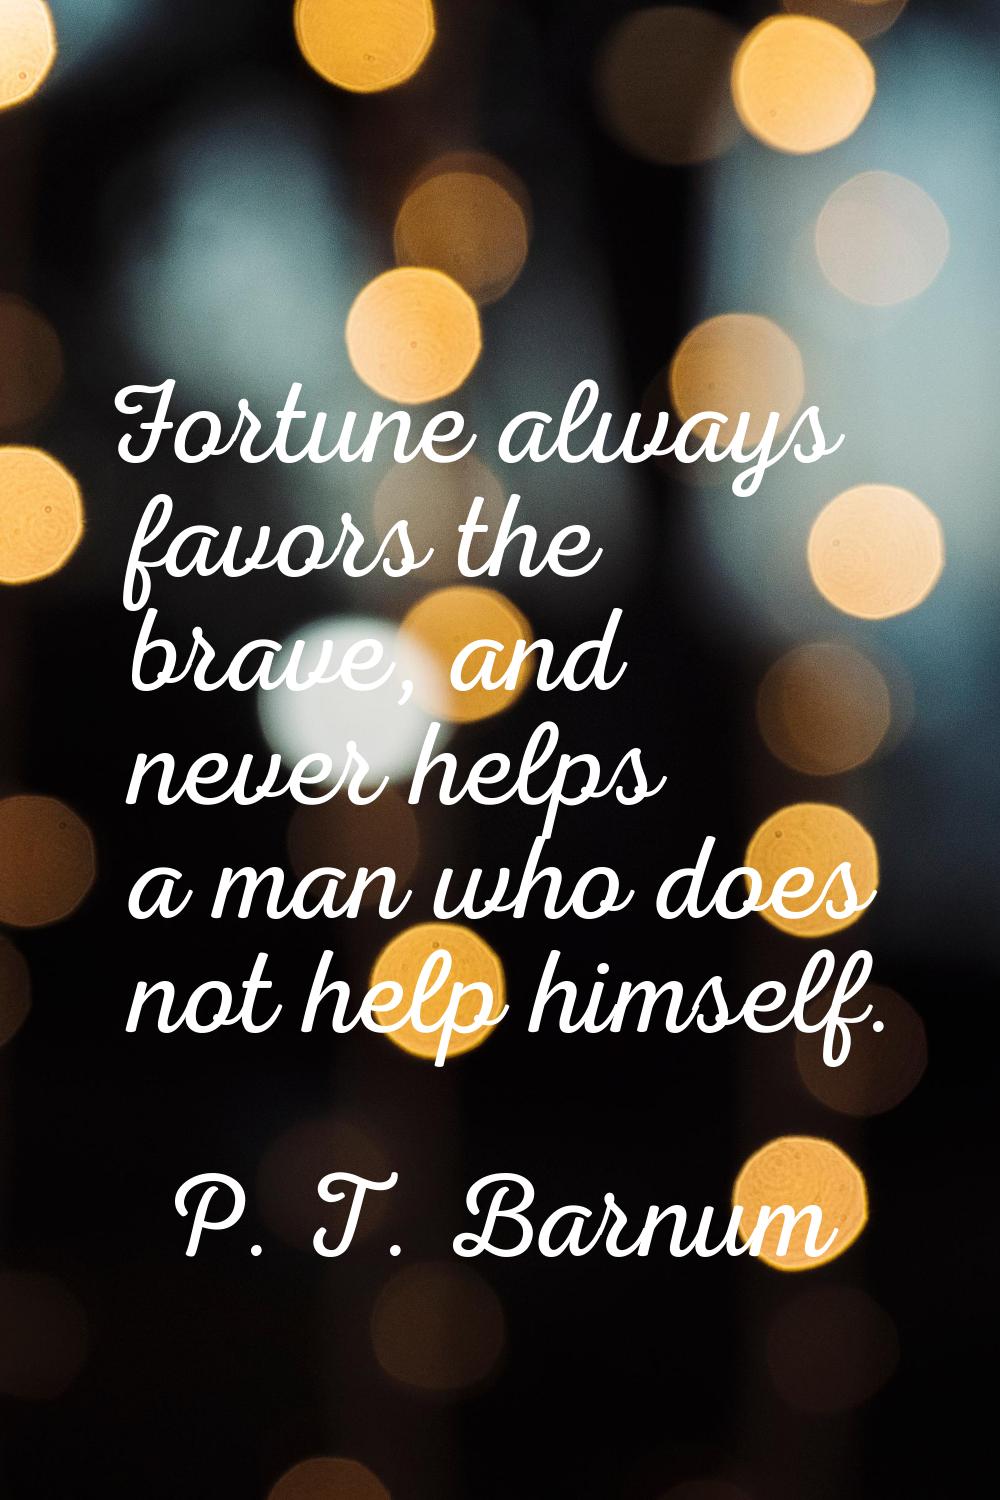 Fortune always favors the brave, and never helps a man who does not help himself.